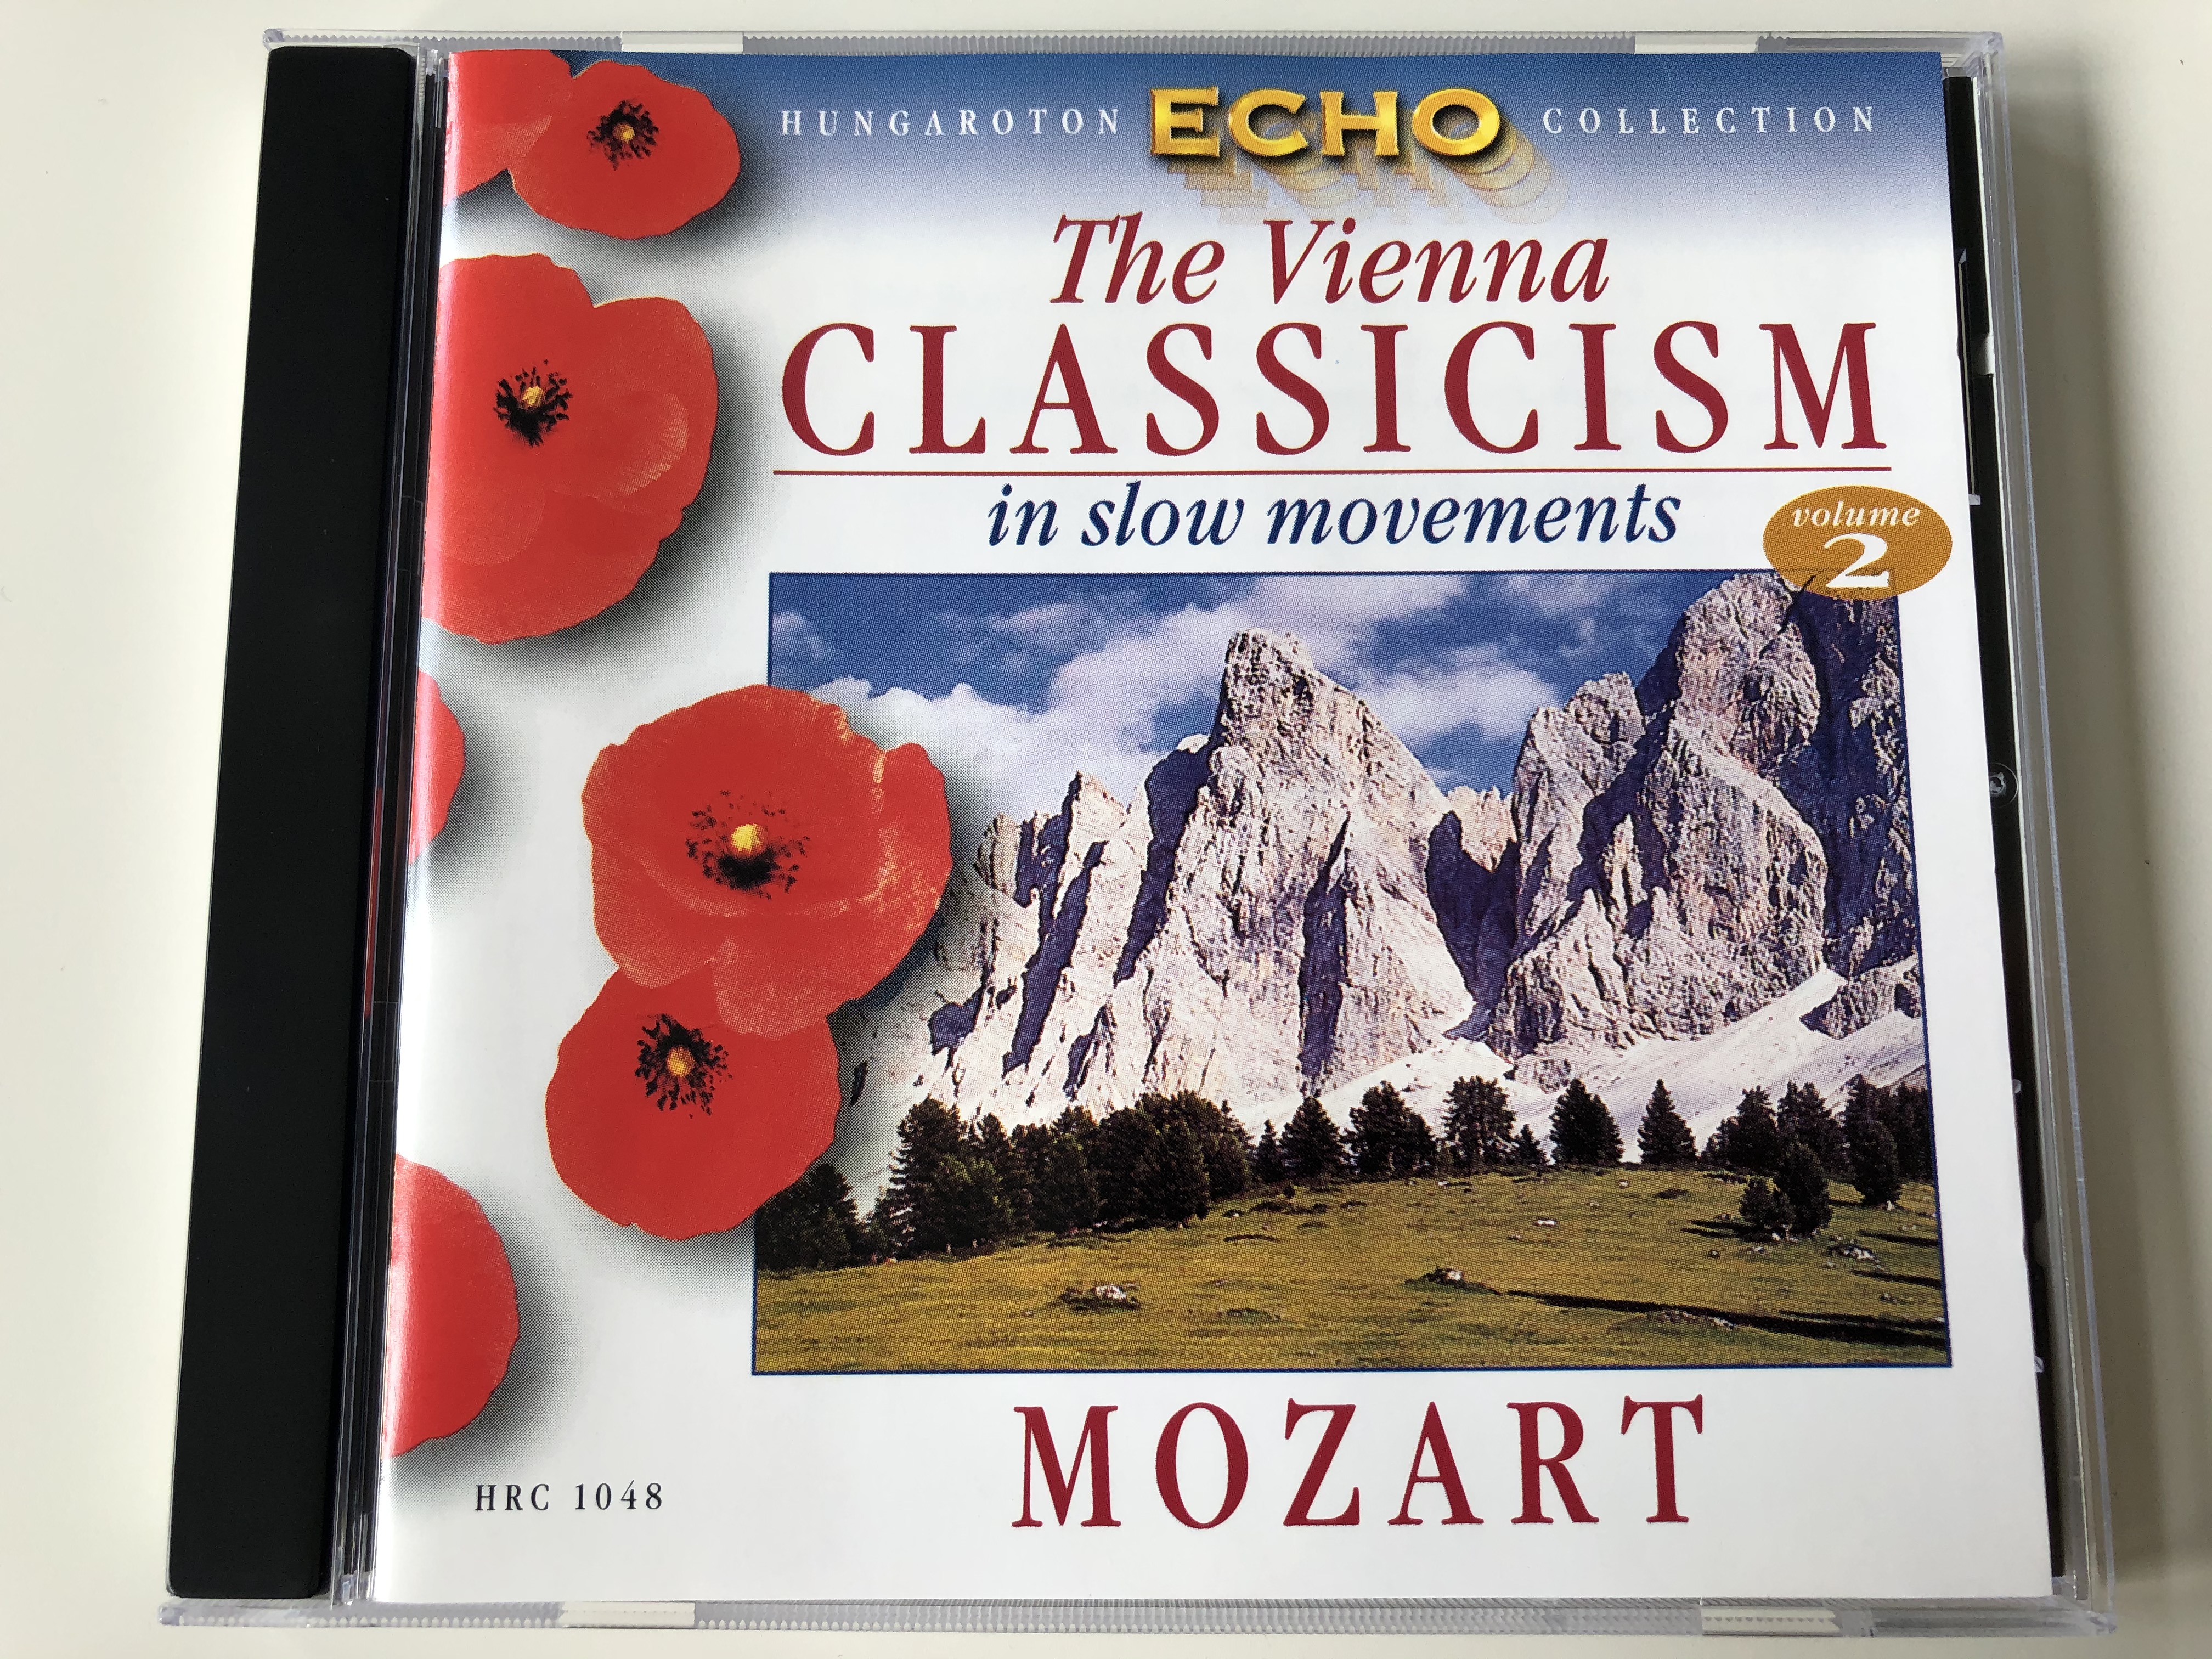 the-vienna-classicism-in-slow-movements-vol.2-mozart-hungaroton-classic-audio-cd-1999-stereo-hrc-1048-1-.jpg